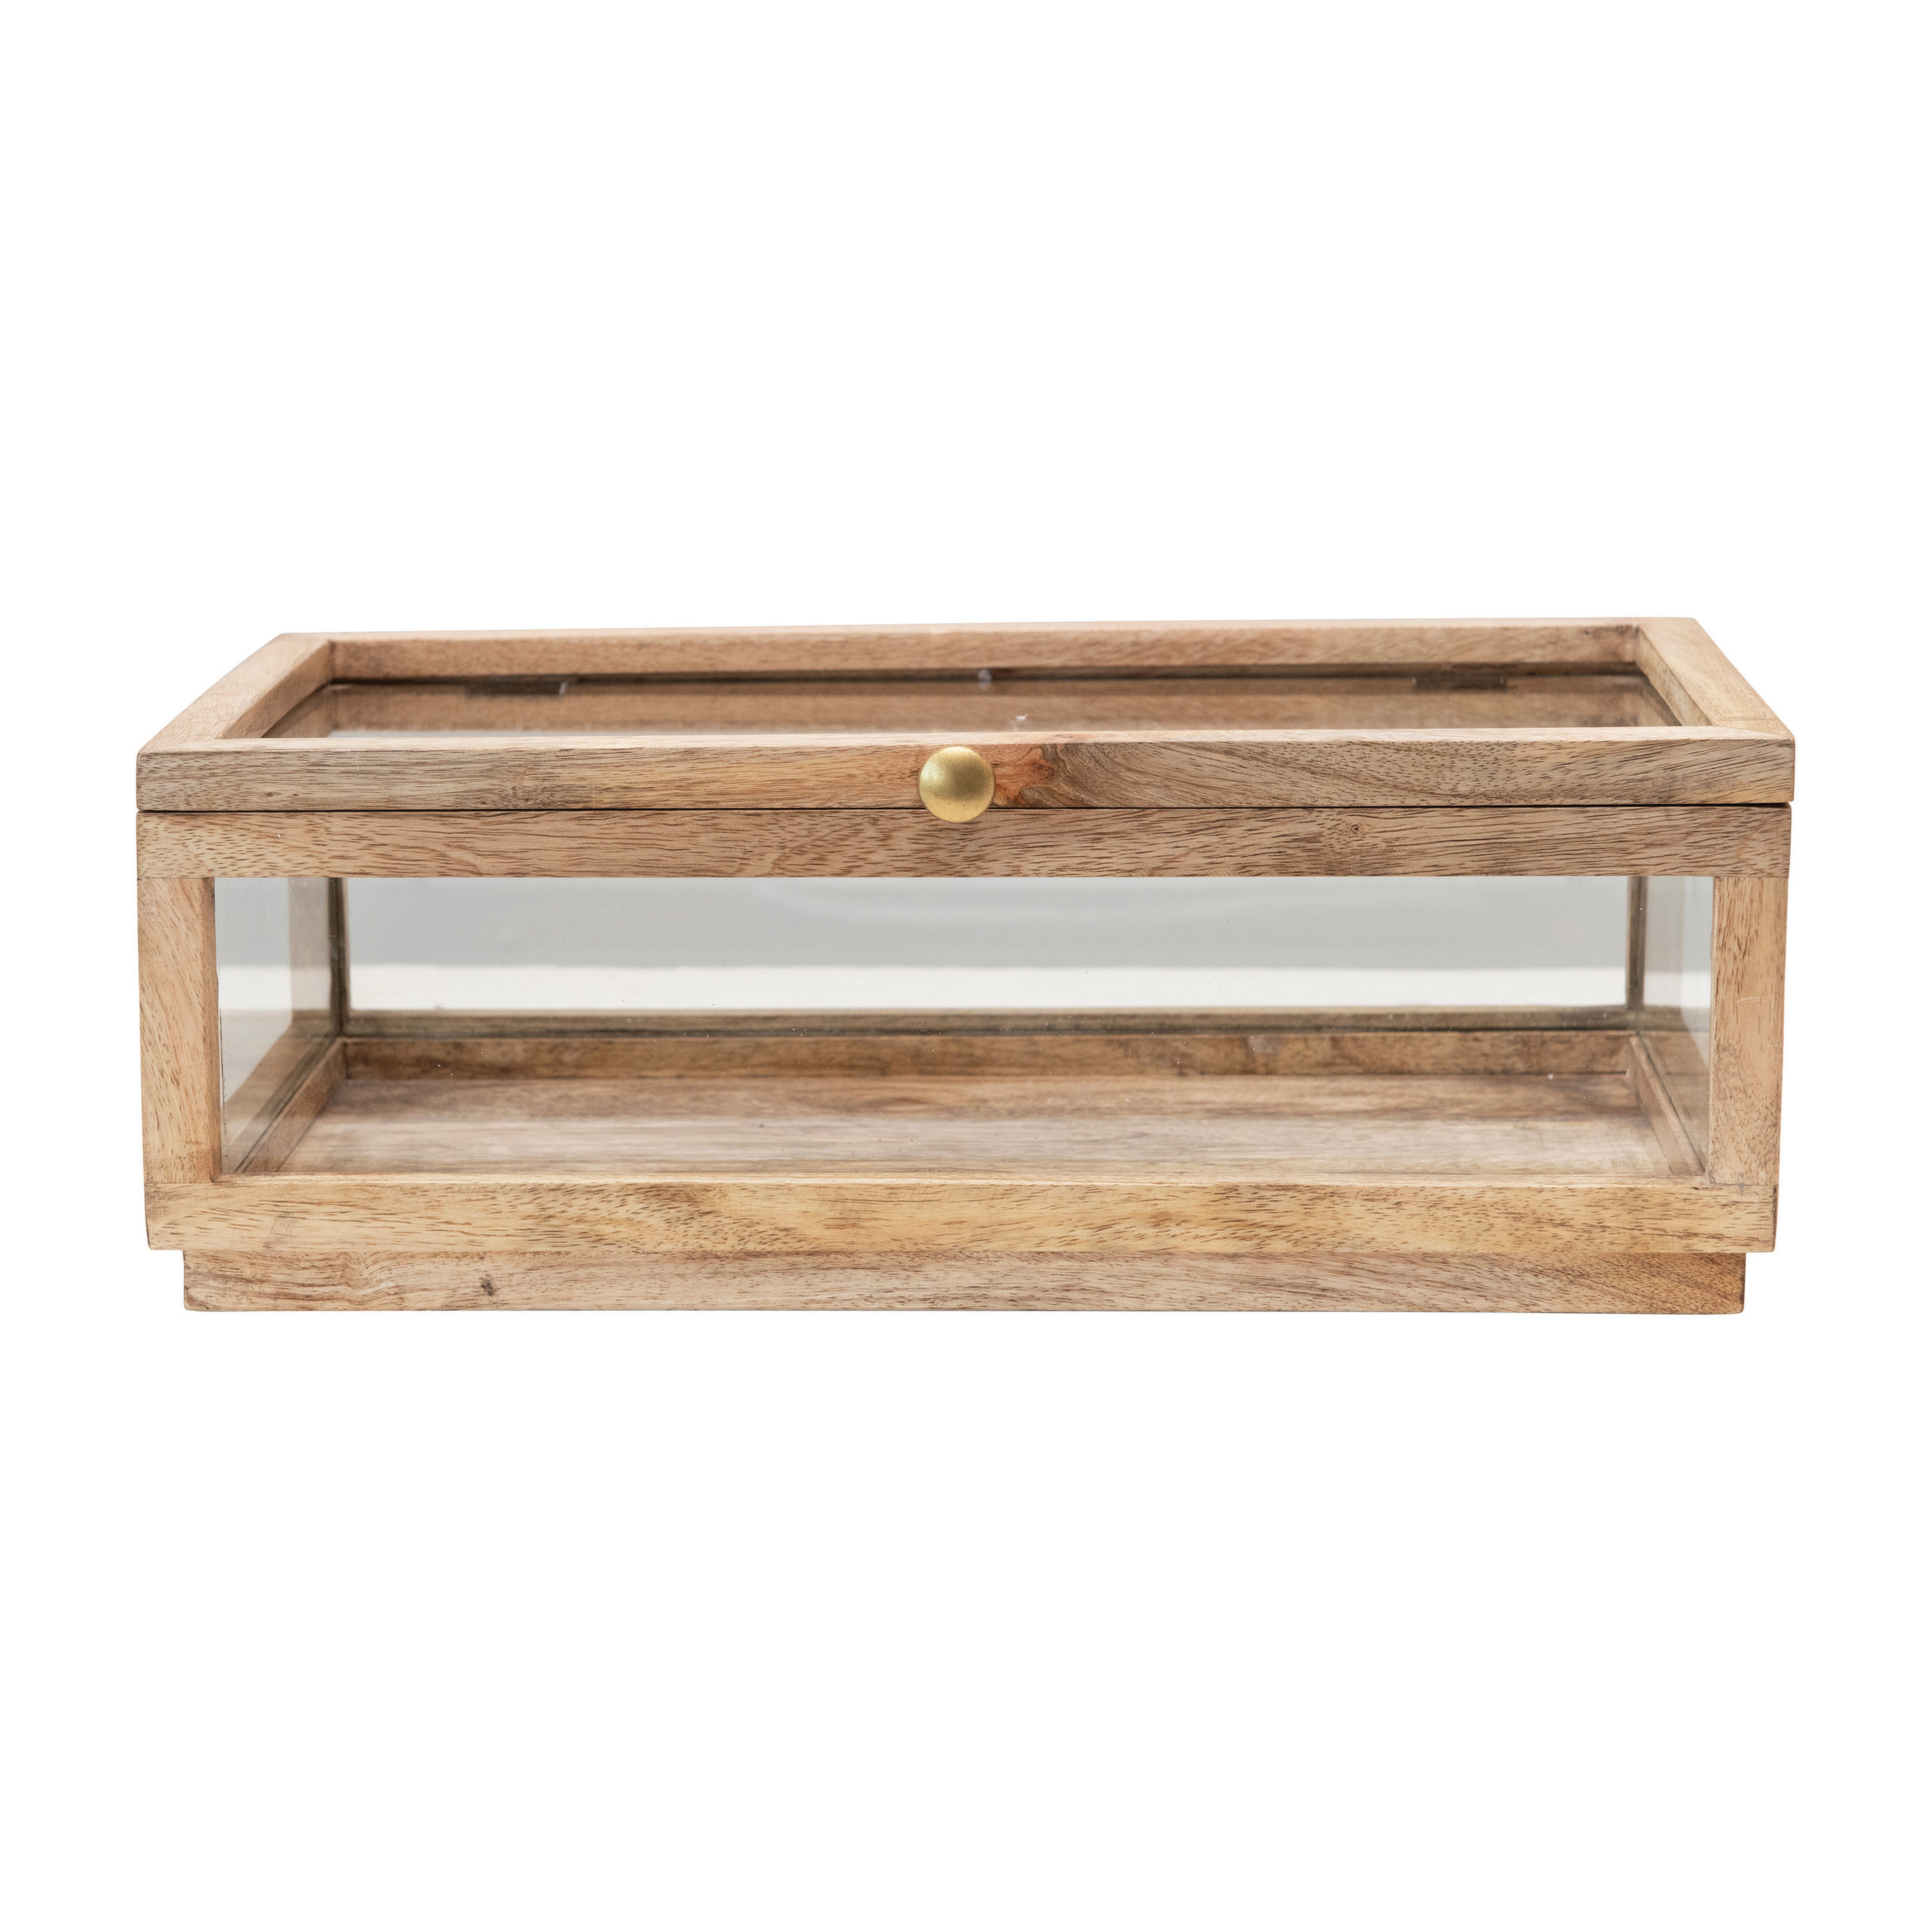 Mango Wood & Glass Display Box with Lid - Nomad Home